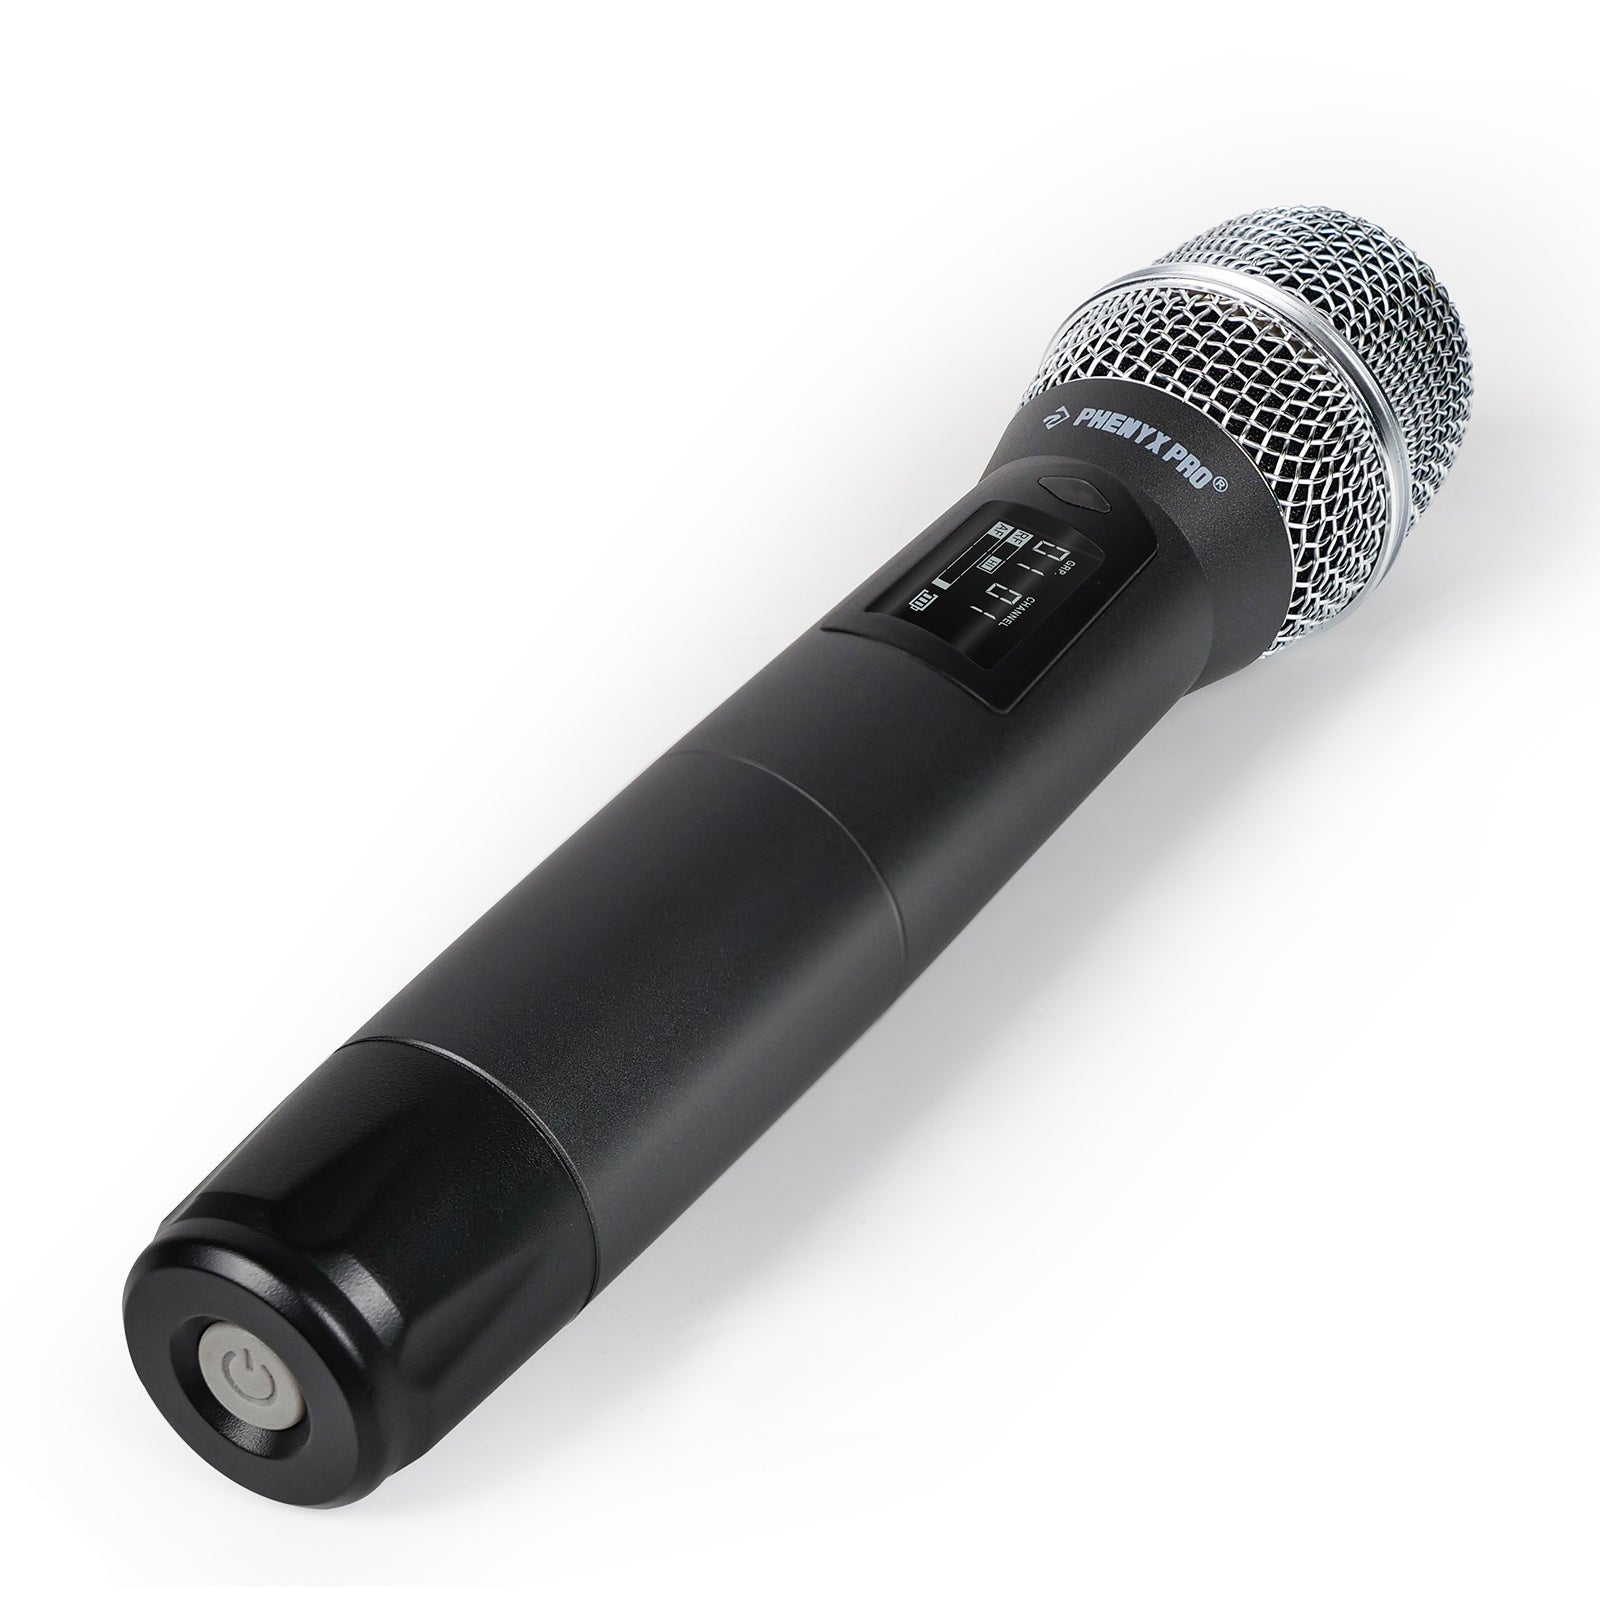 Phenyx Pro PTU-1U High fidelity audio quality with cardioid pattern to isolate unwanted ambient sound